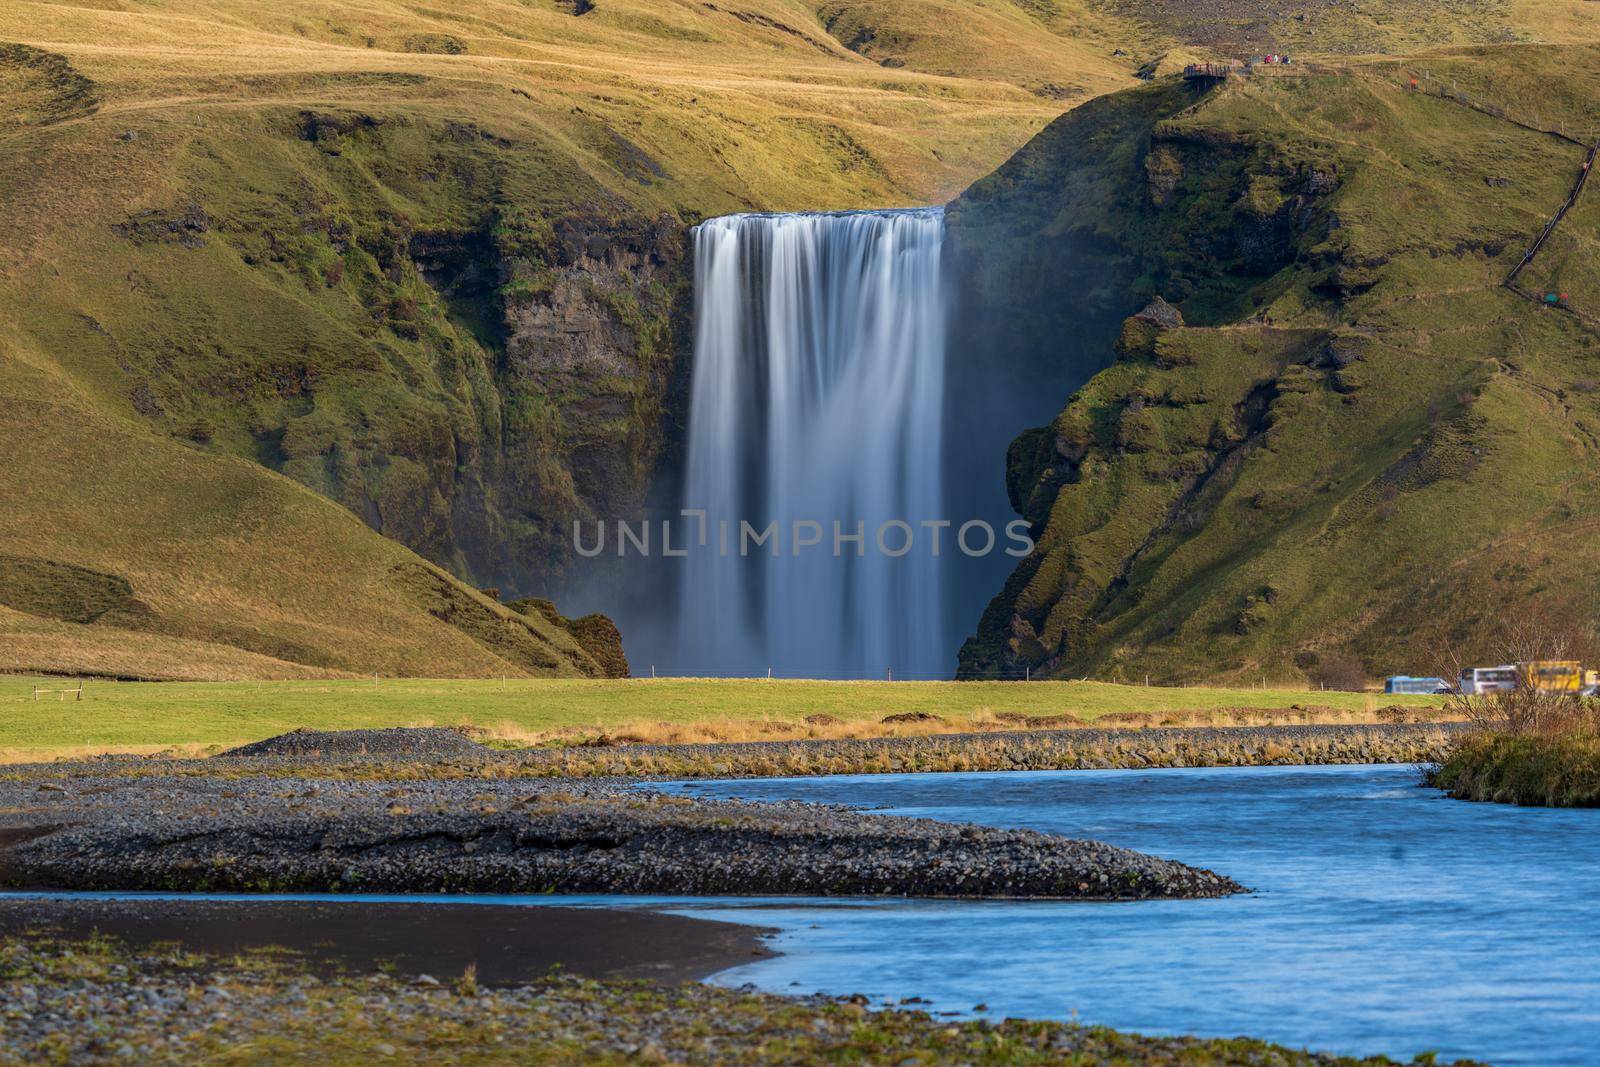 Long exposure of famous Skogafoss waterfall in Iceland from the distance with hikers and blurred cars by FerradalFCG